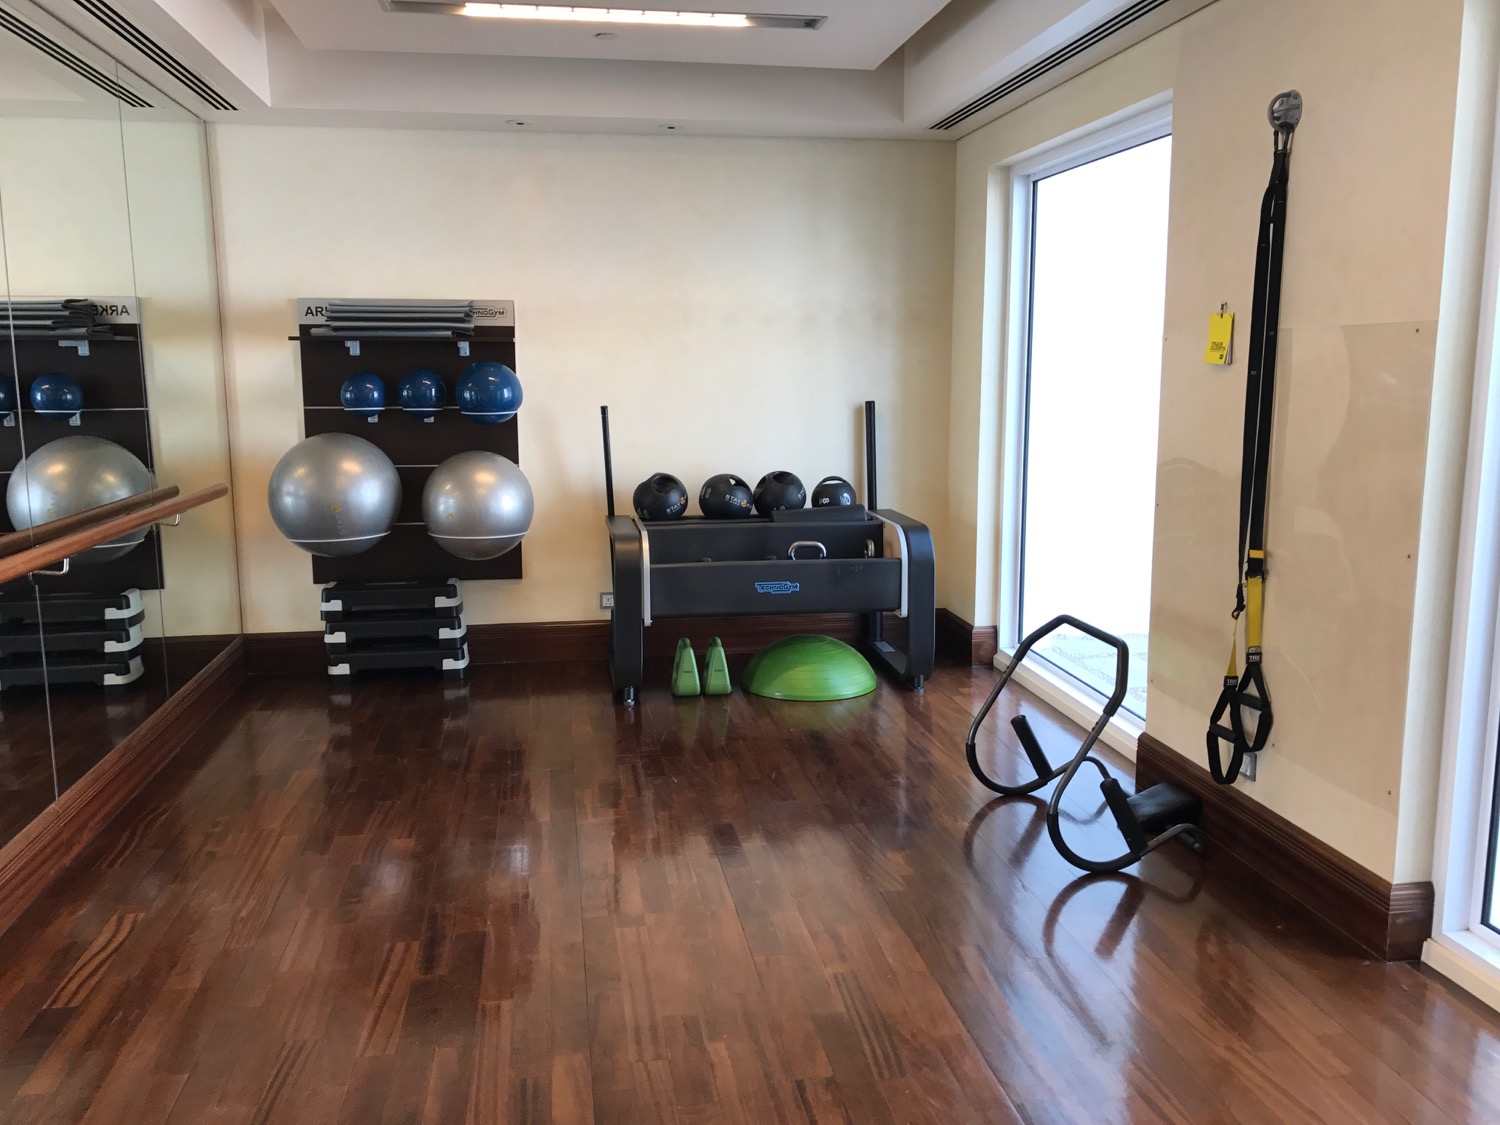 a room with a gym equipment and balls